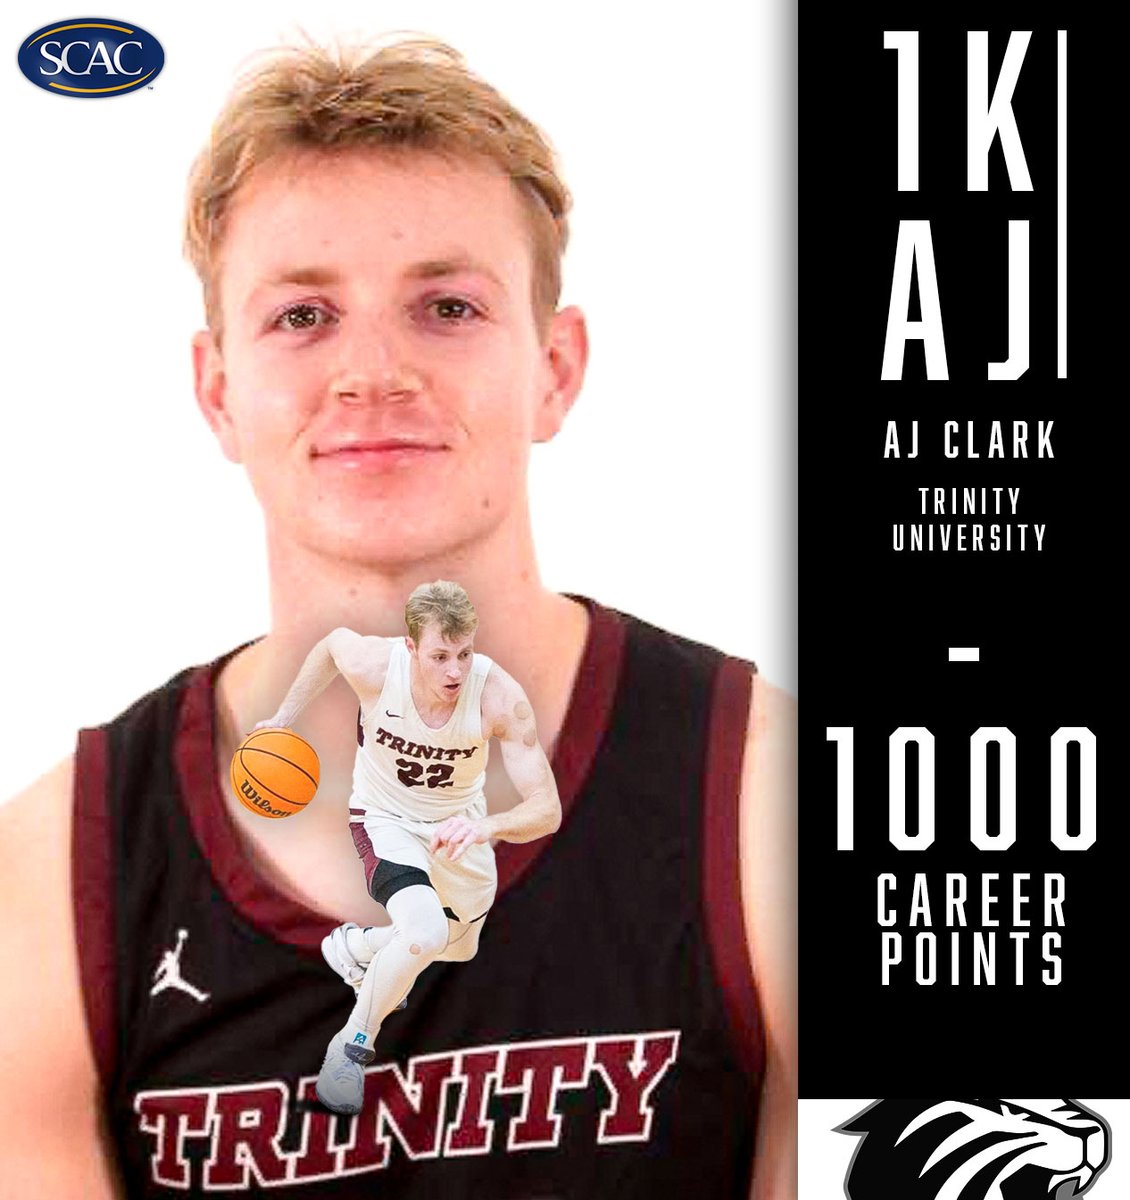 🚨#SCACMBB | AJ Clark of 
@TrinityUTigers broke the 1000 career-points mark tonight as the Tigers lock in their second place #SCAC finish!